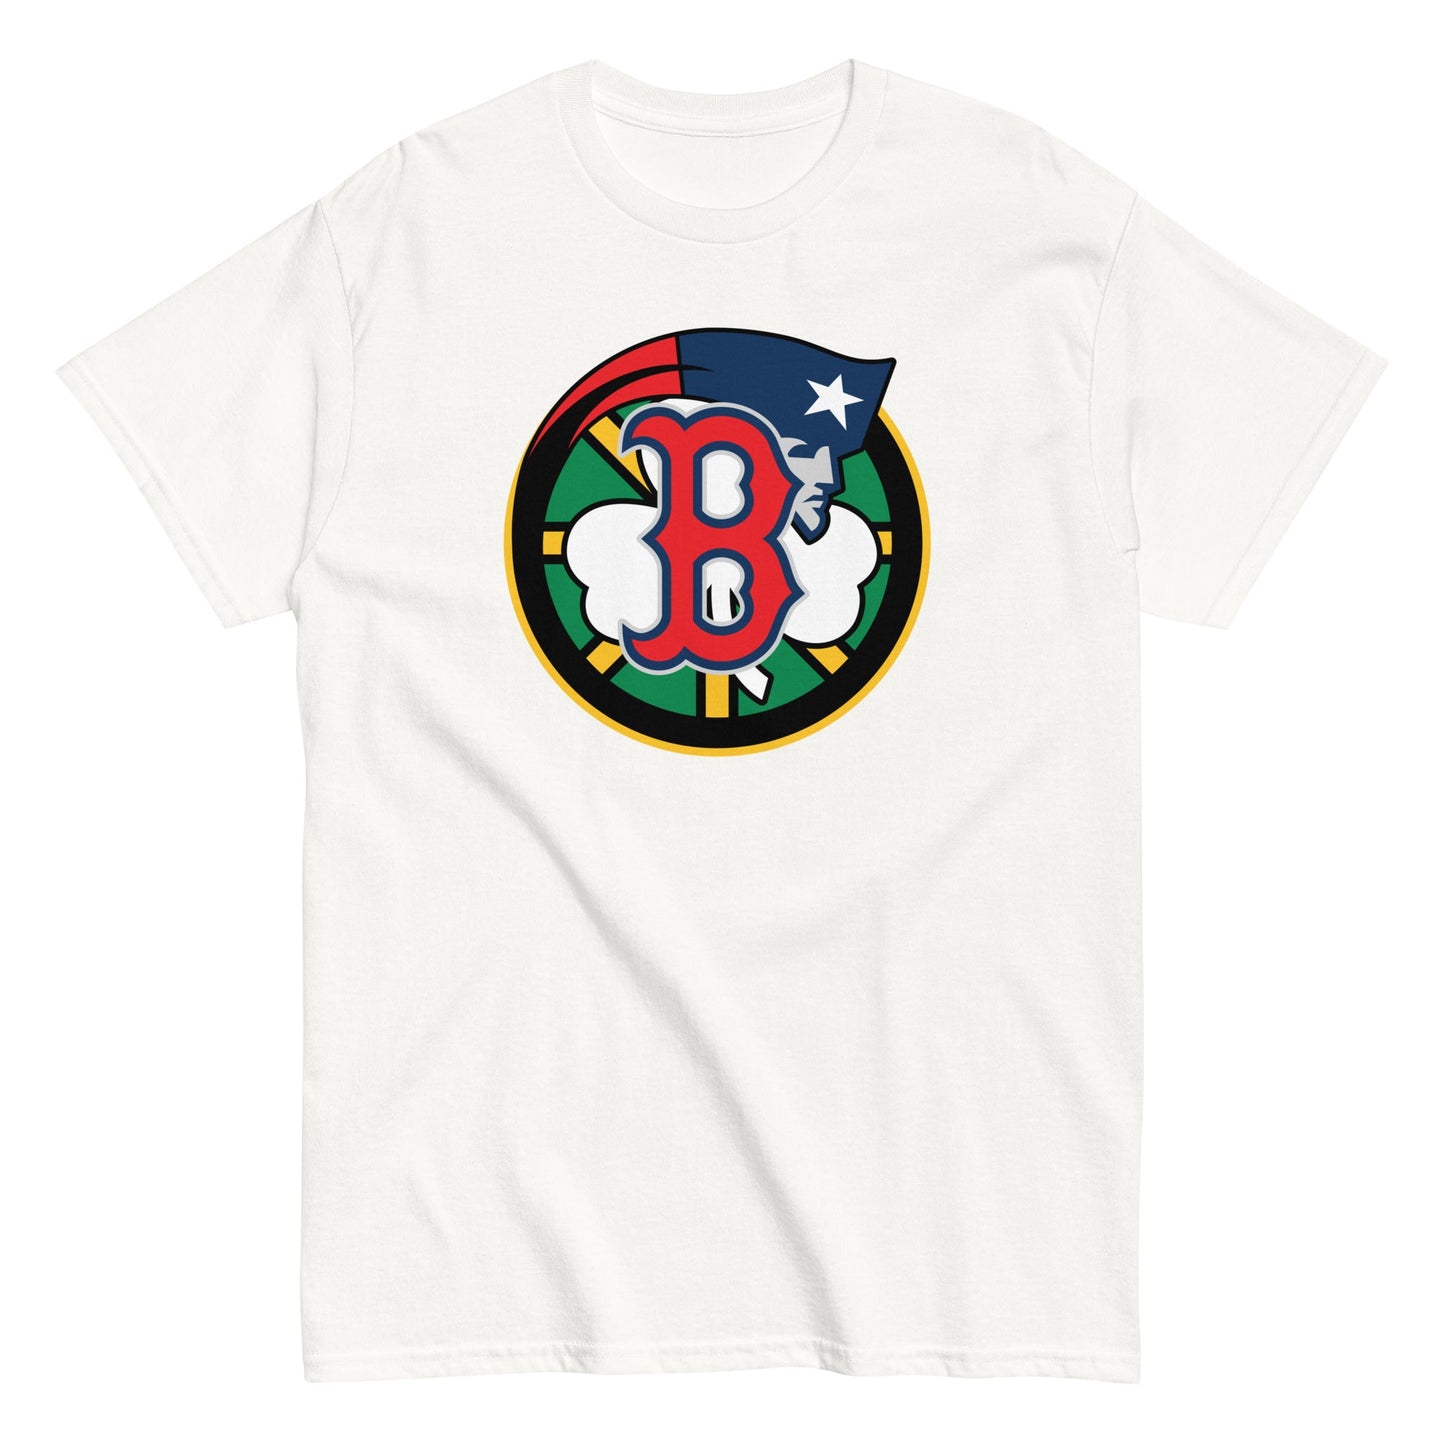 BOS Tee - Full Color